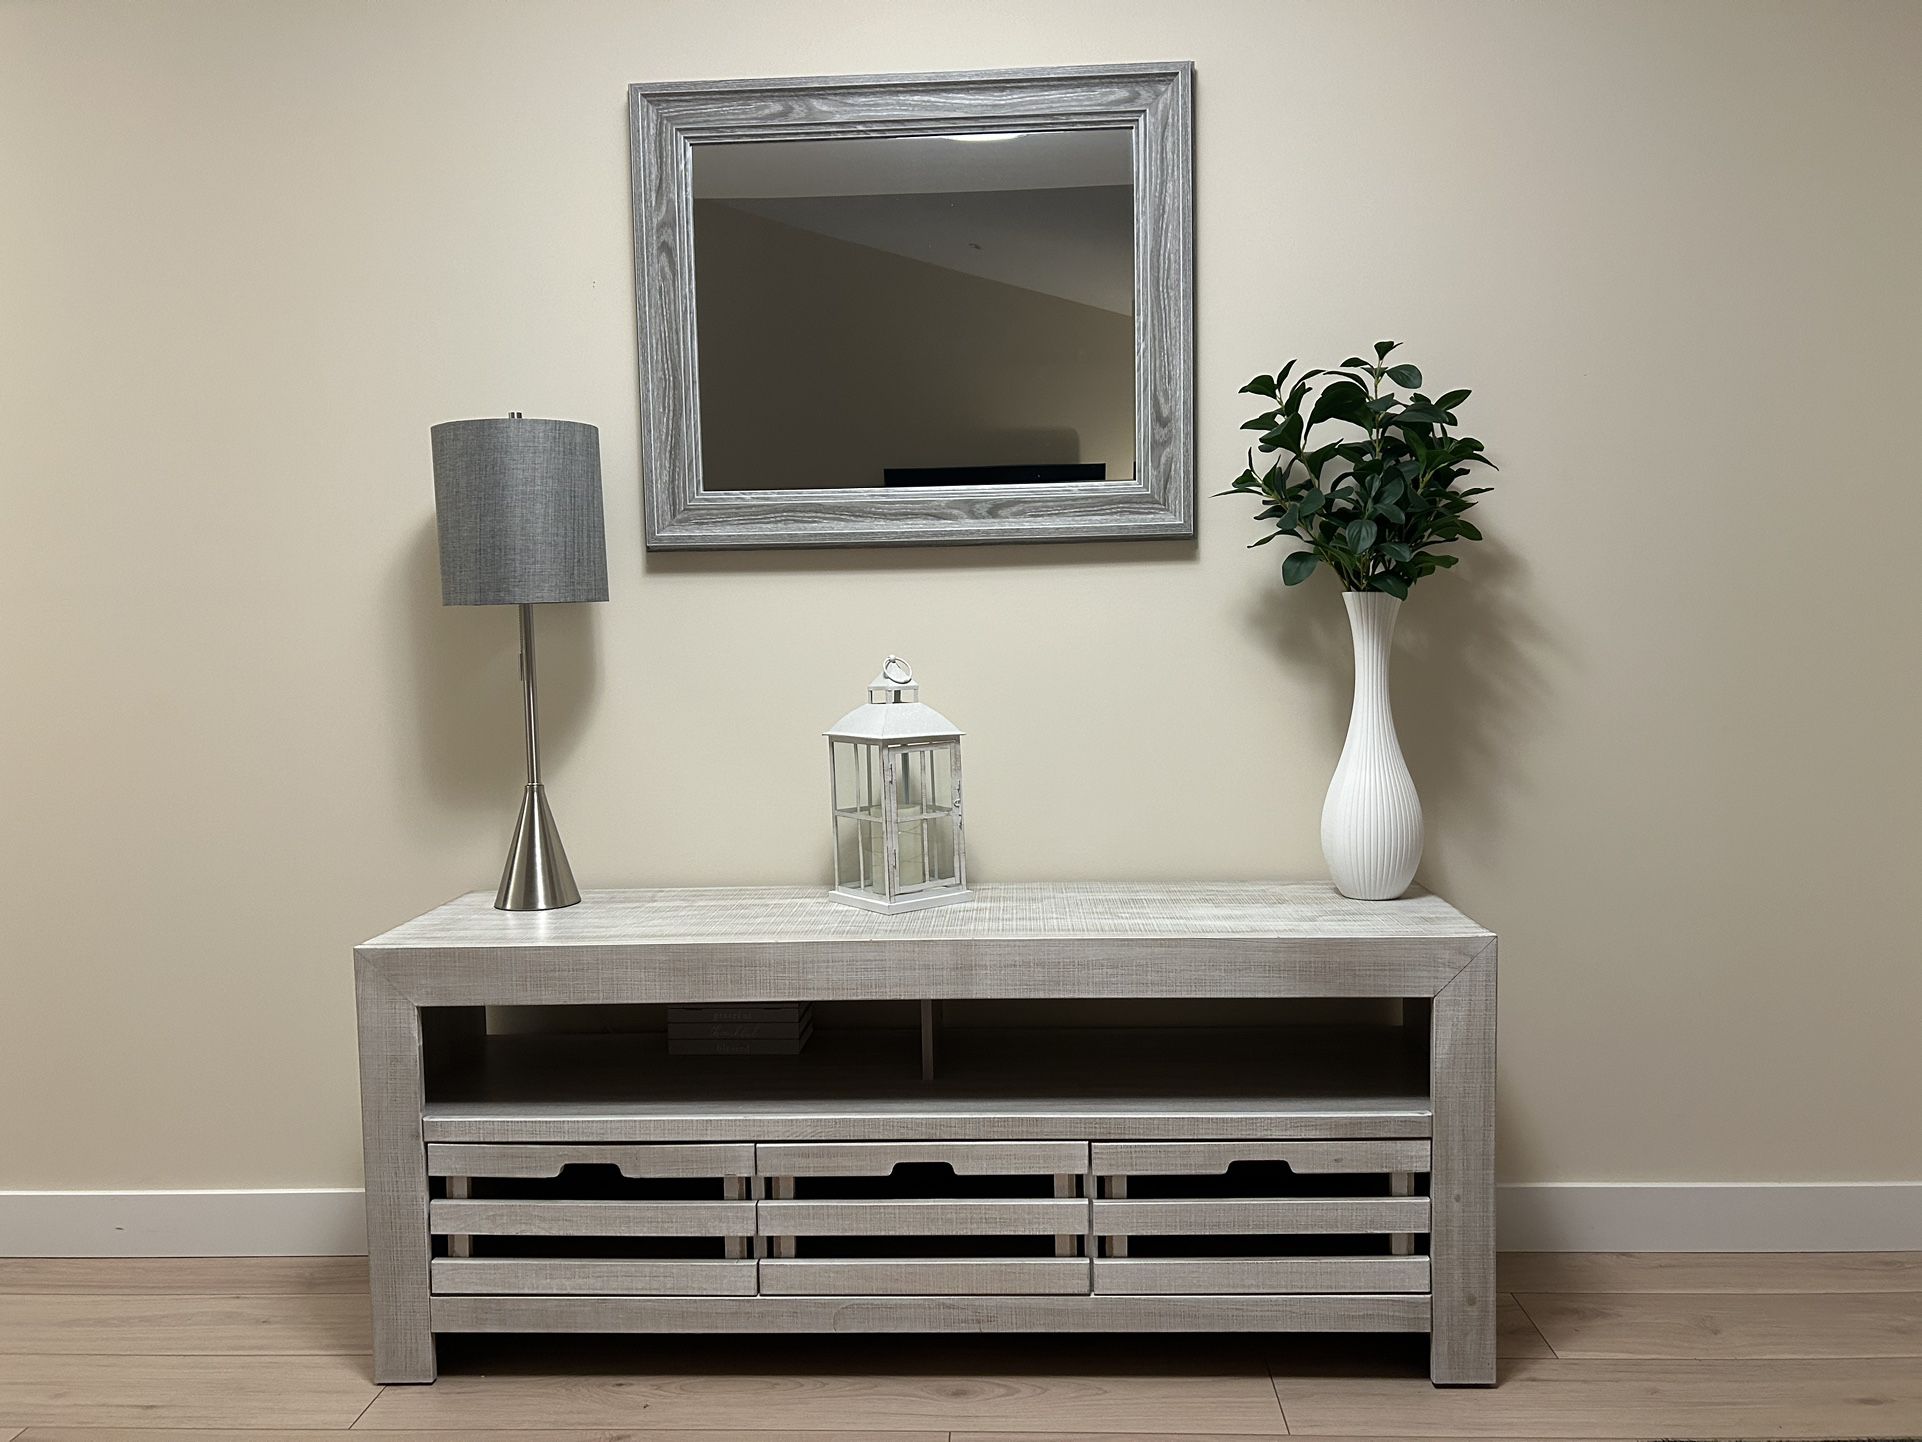 White/Brownish  Console -Entryway Table